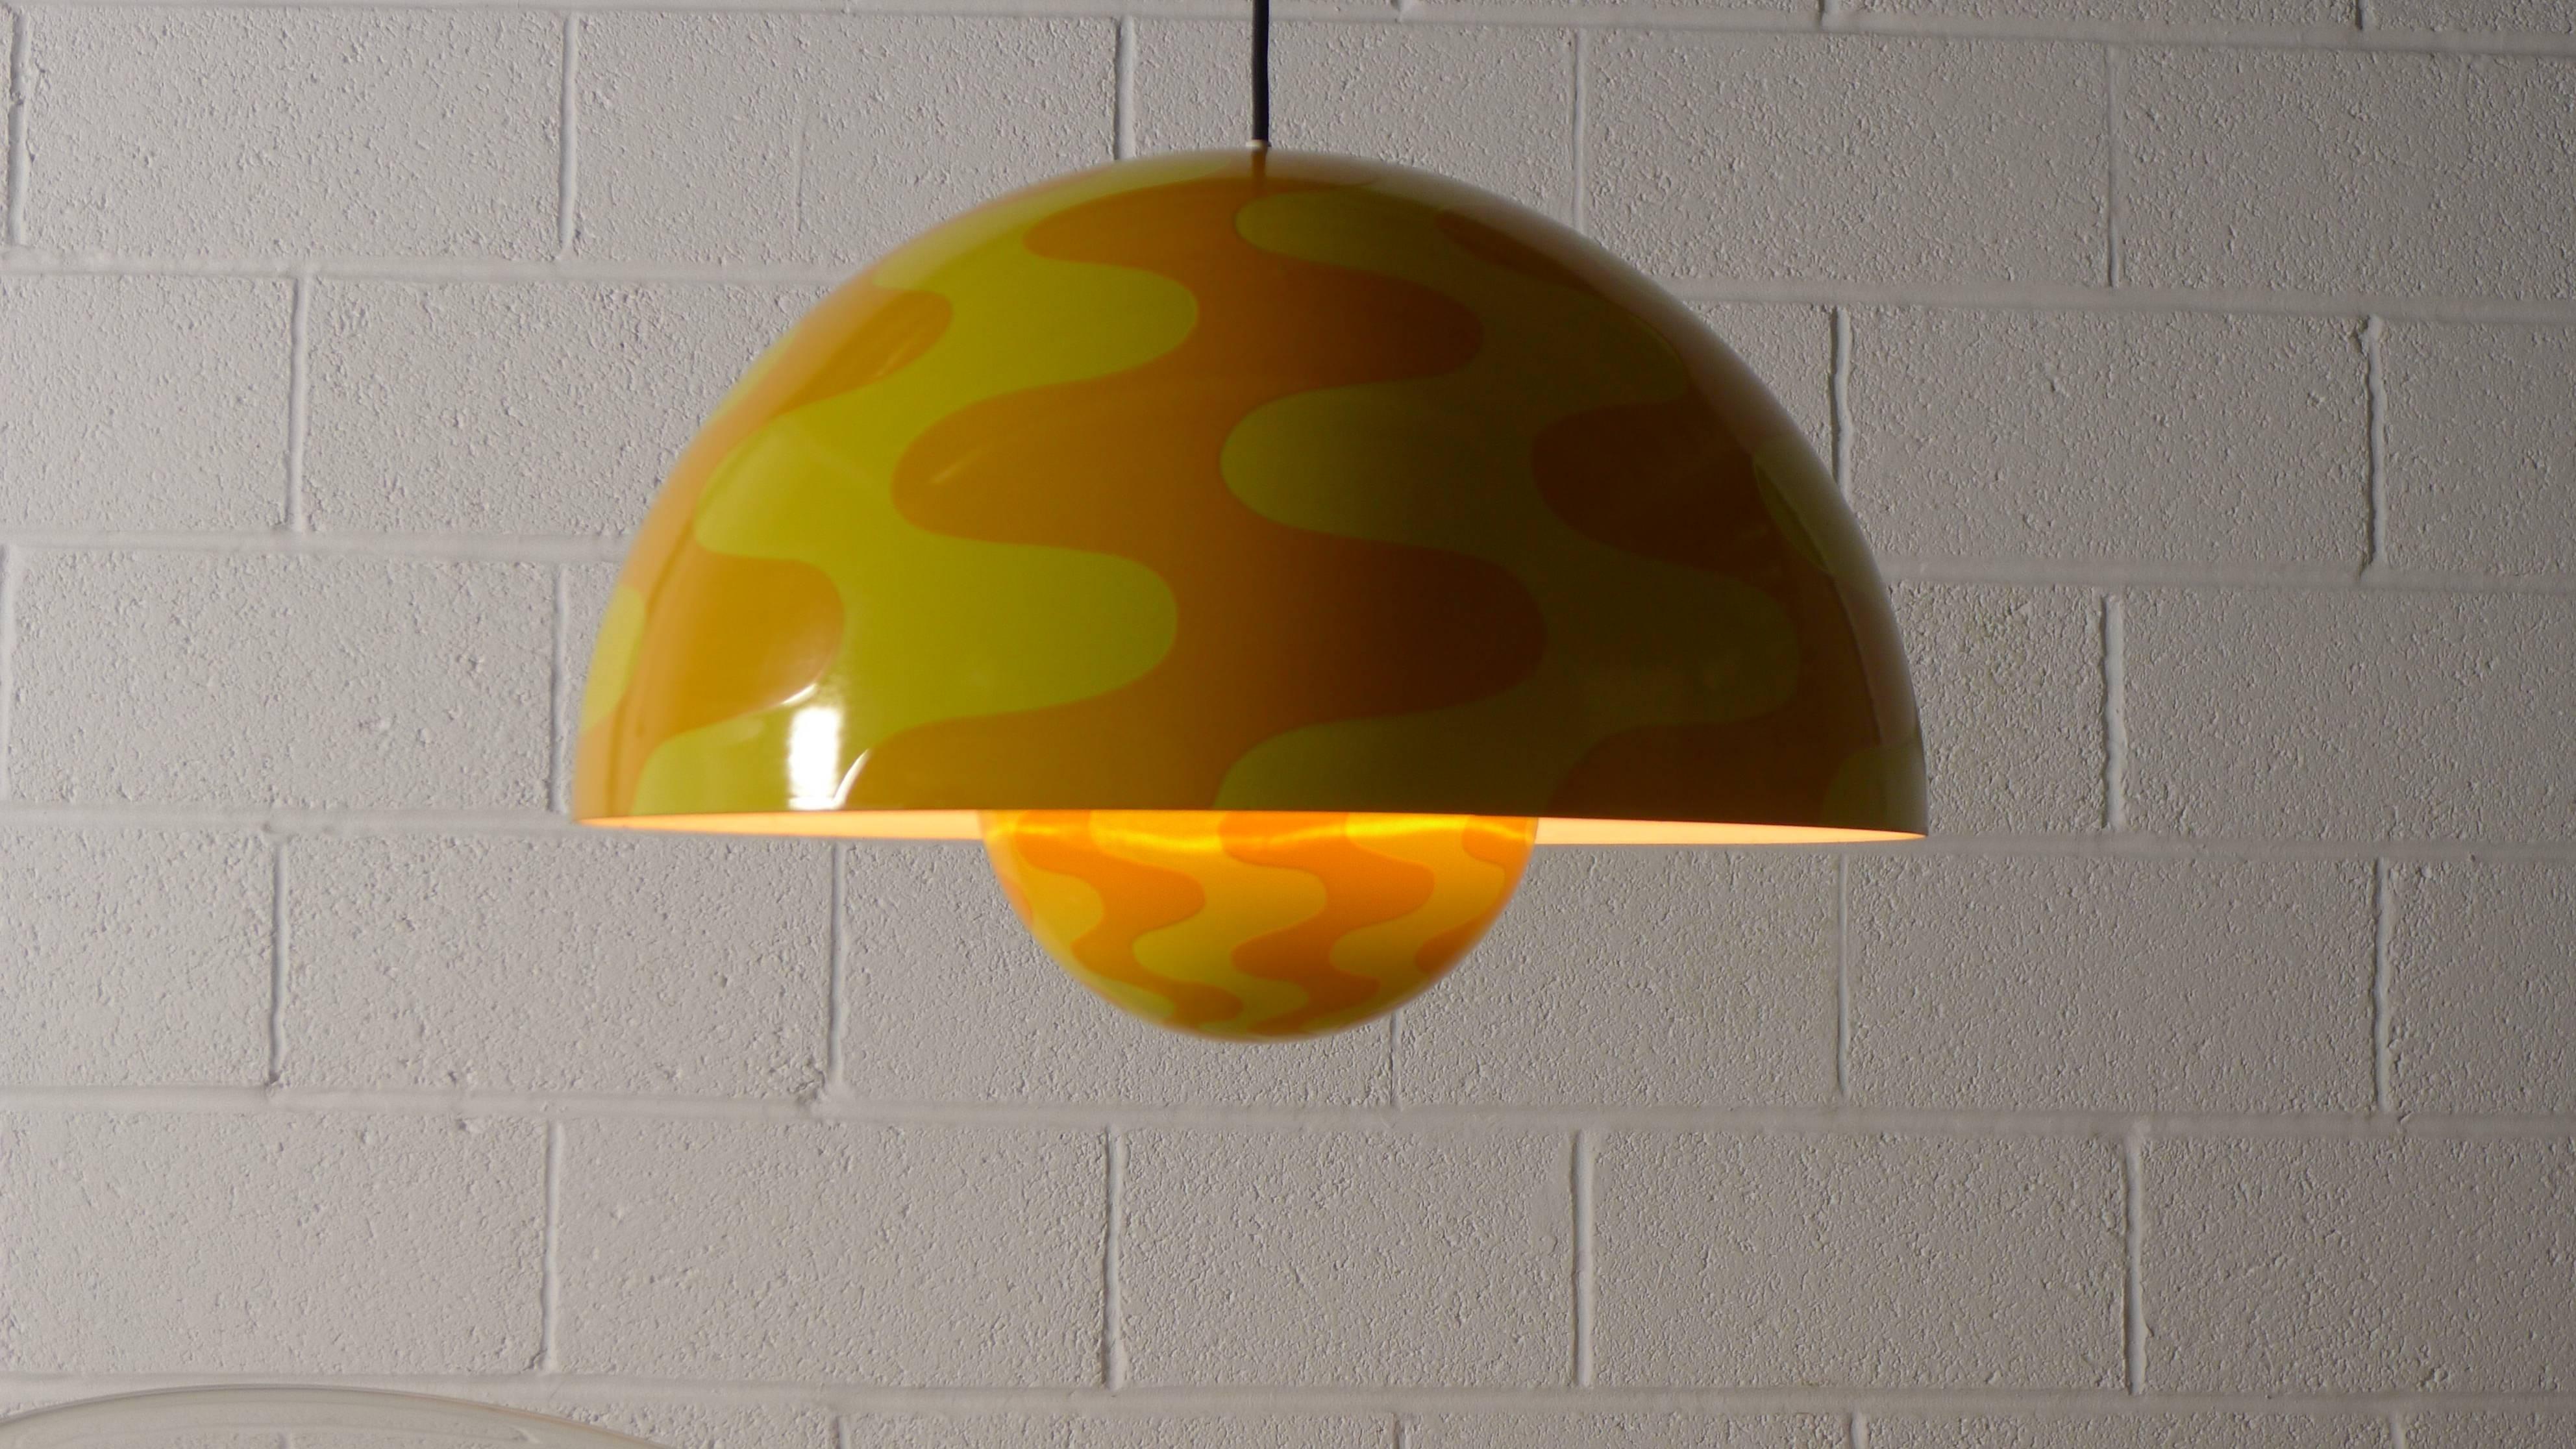 Verner Panton for Louis Poulsen, Denmark, circa 1970. A rare large sized version of the Classic Flowerpot lamp, yellow and orange enameled metal.
Some restoration to the enamel.